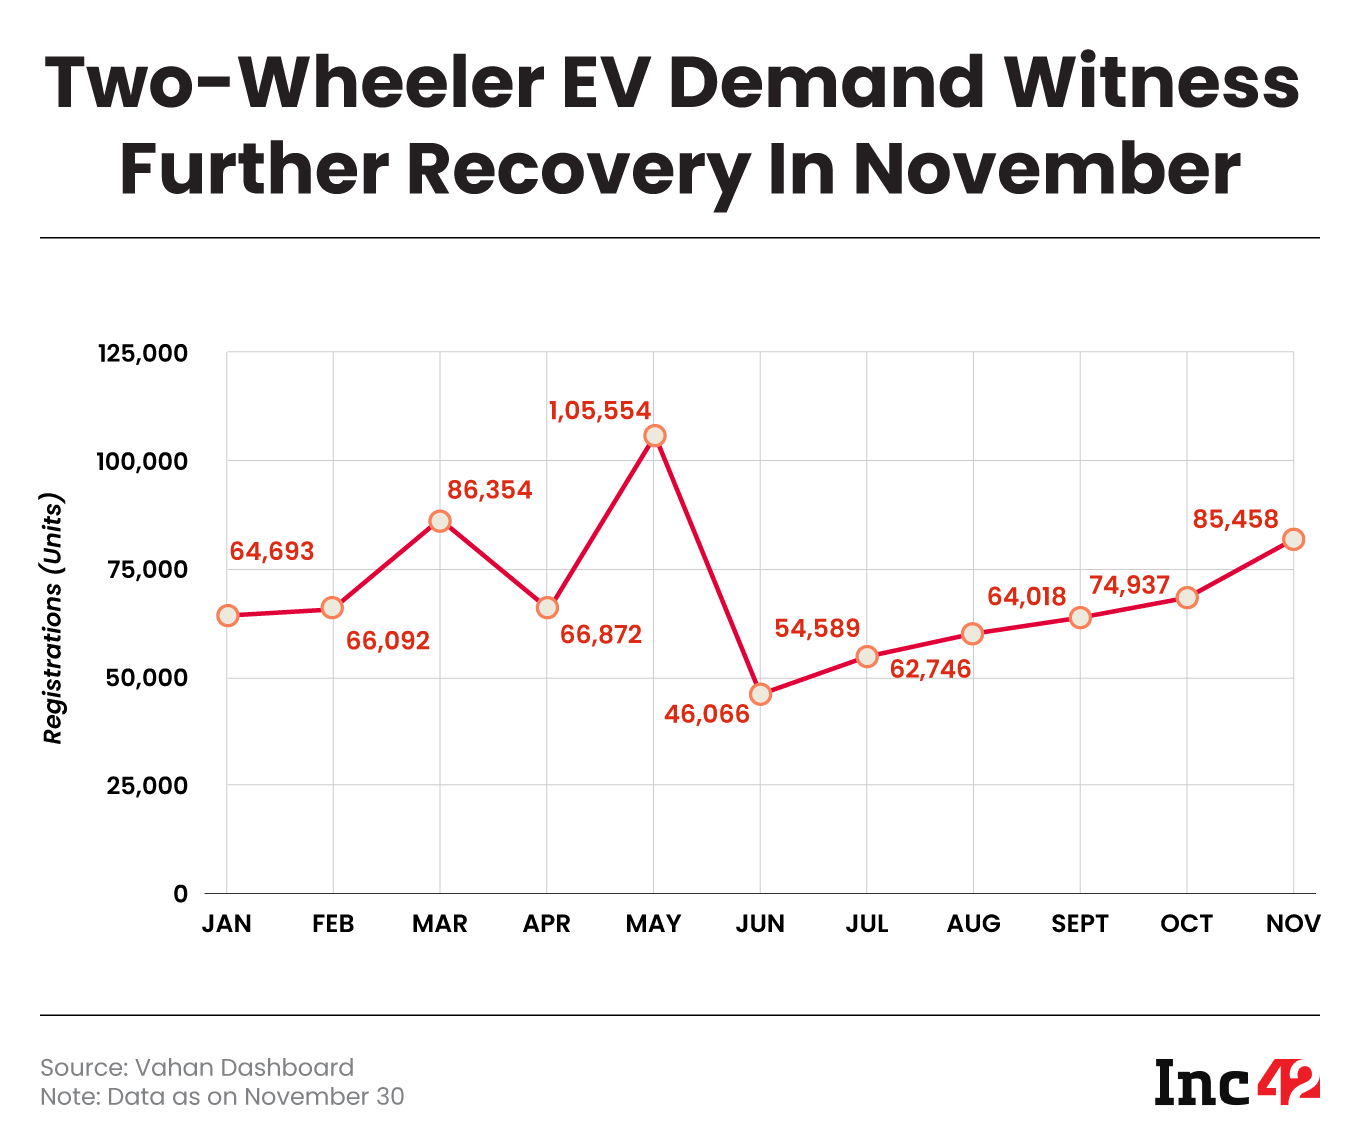 Two-Wheeler EV Demand Witness Further Recovery In November